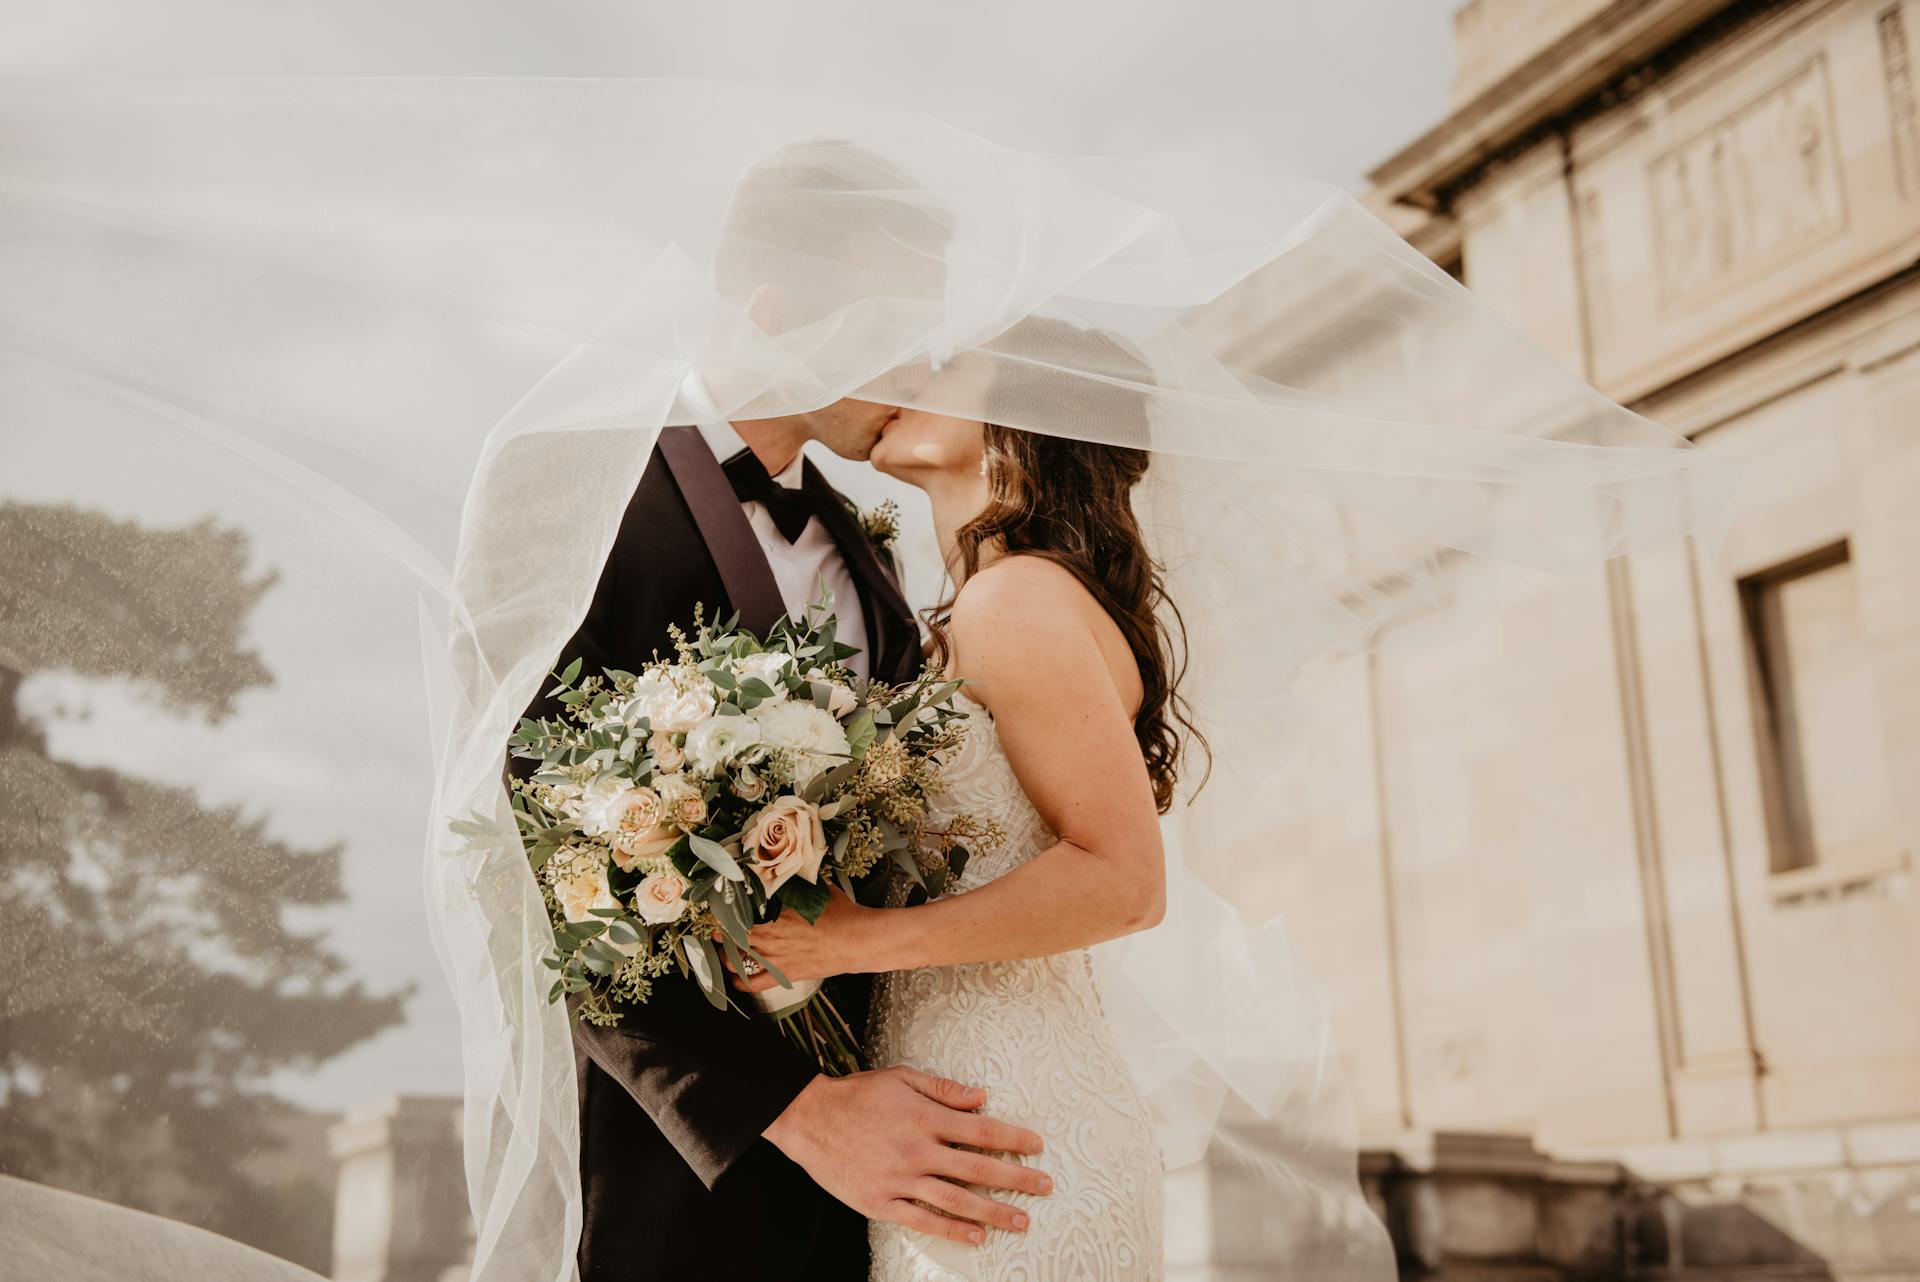 A bride and groom kissing | Source: Pexels